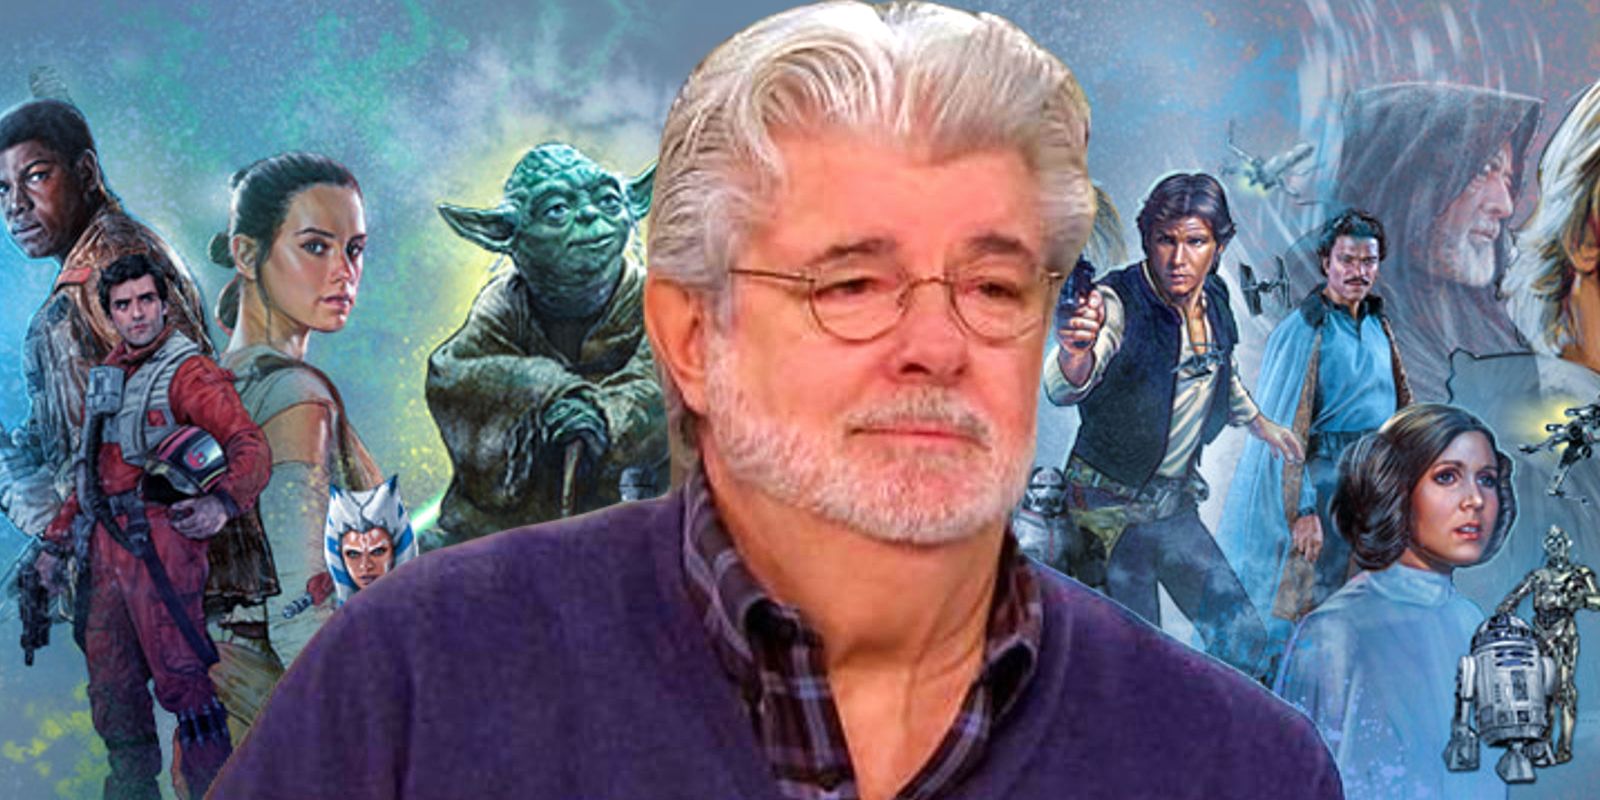 George Lucas in front of a Star Wars banner